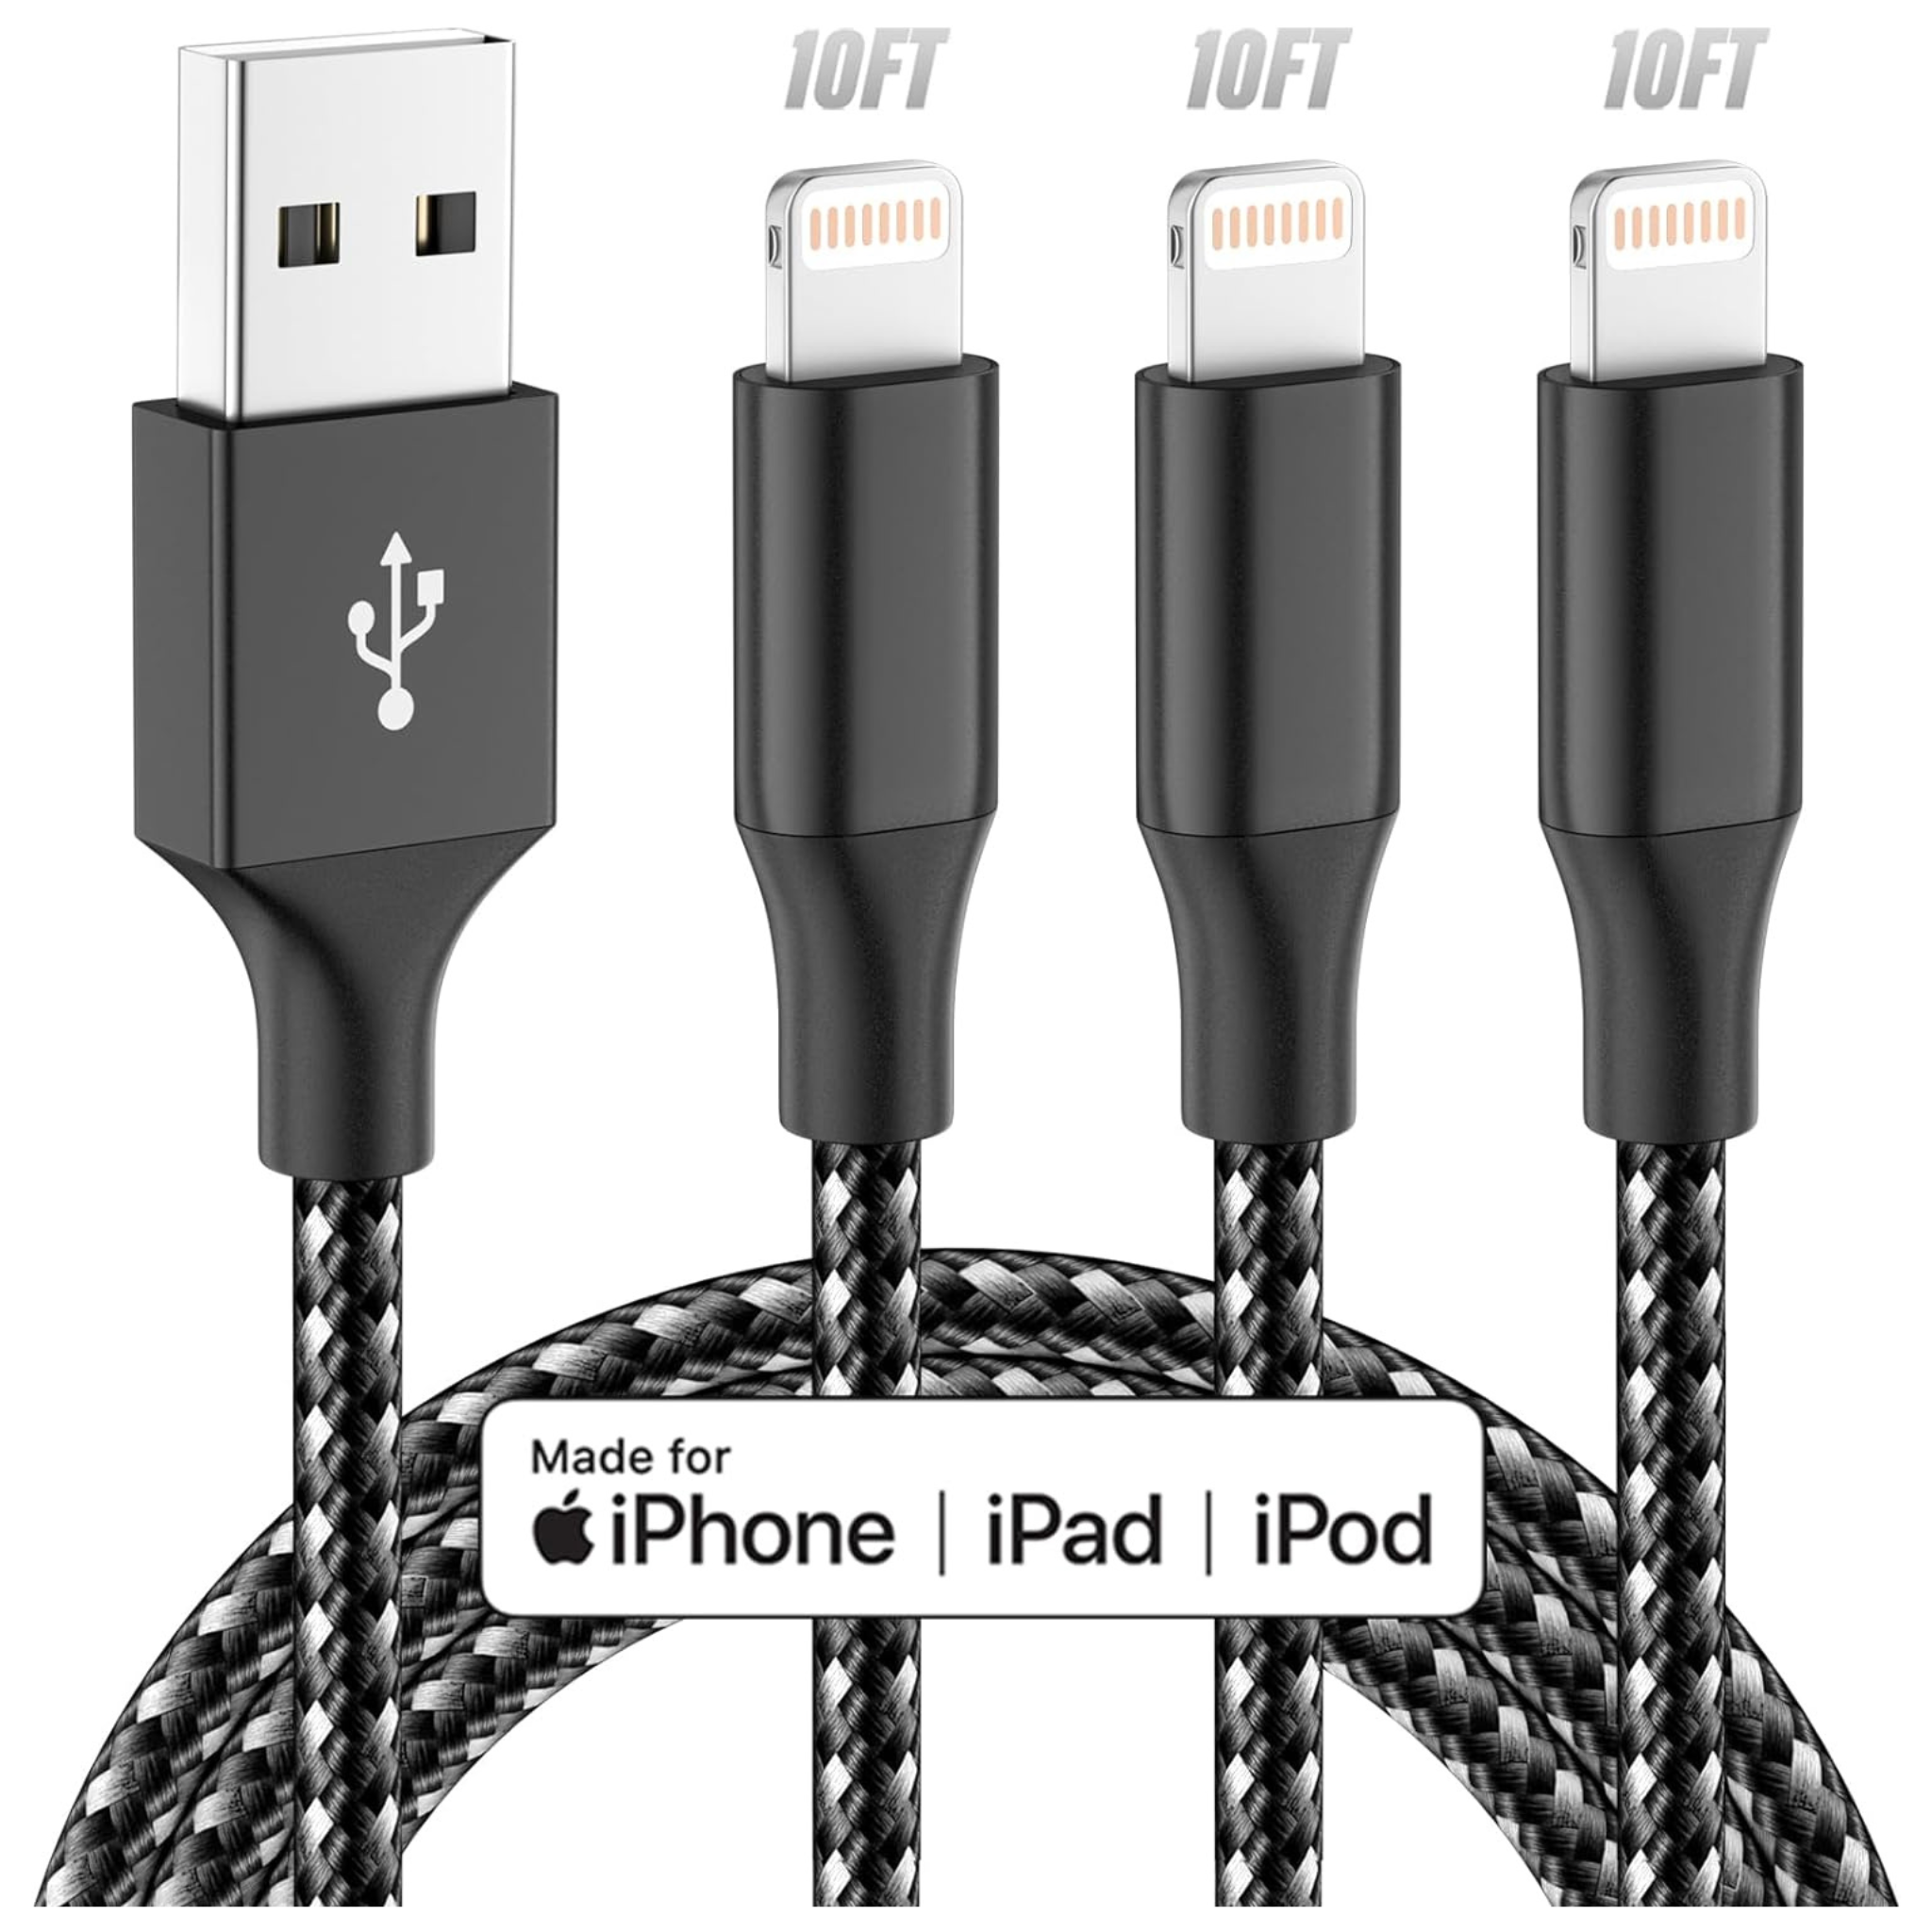 3-Pack of 10-Ft MFi Certified Apple Lightning Cables